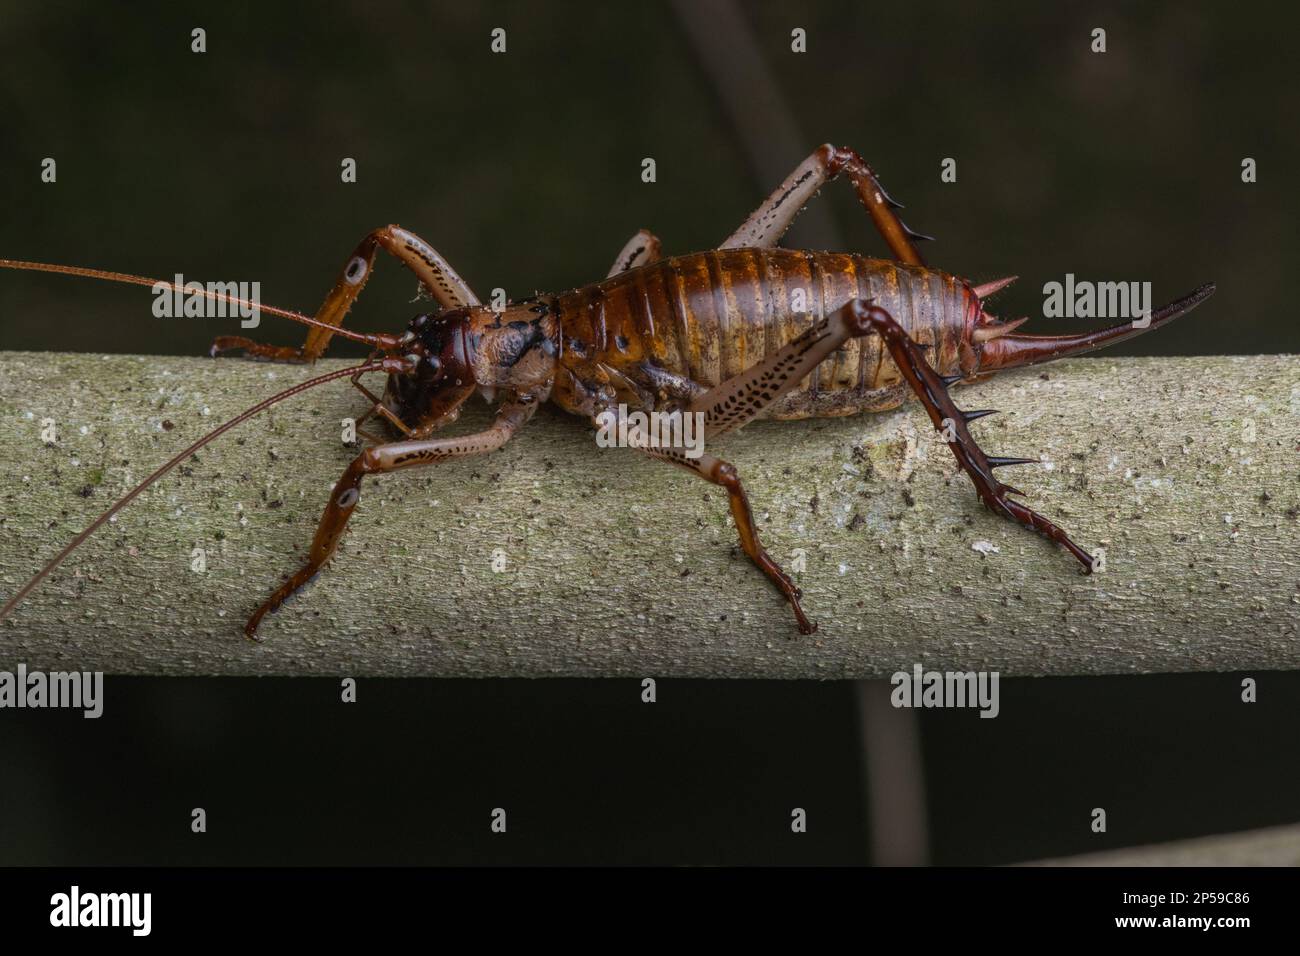 Auckland tree wētā or tokoriro, Hemideina thoracica, these tree weta are large insects endemic to Aotearoa New Zealand. Stock Photo